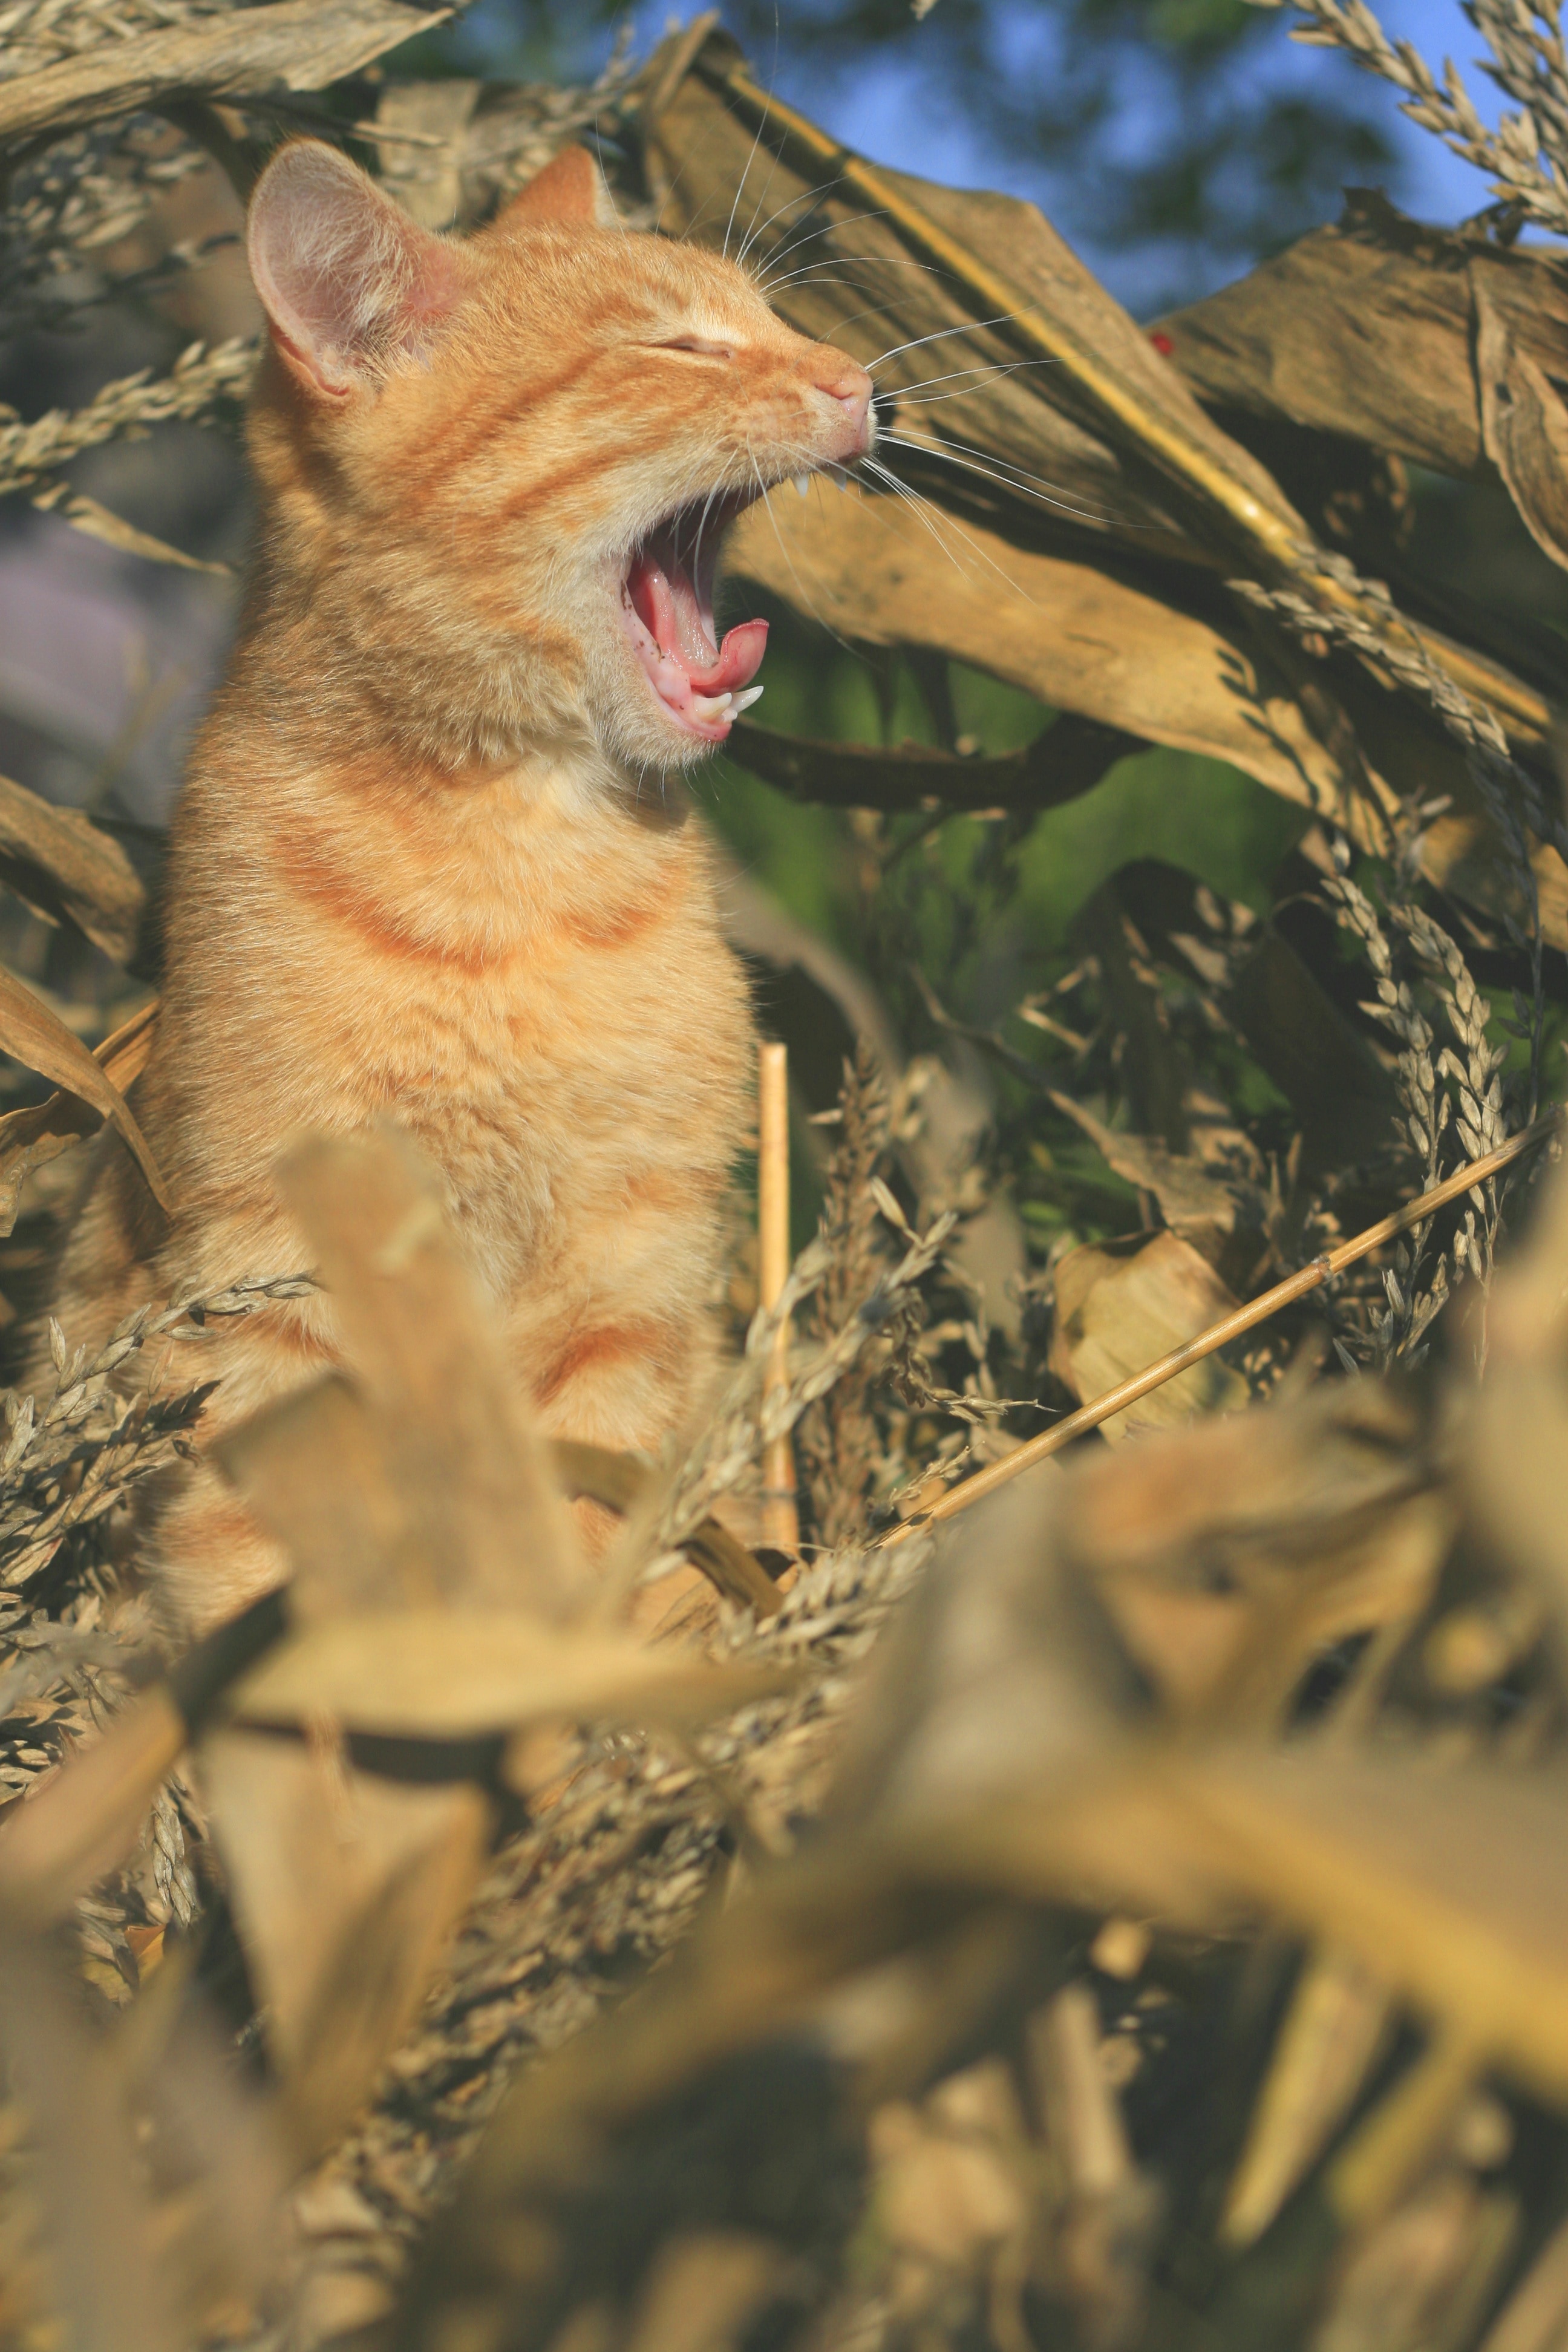 Out, Nature, Tomcat, Cat, Leaves, Autumn, one animal, mouth open